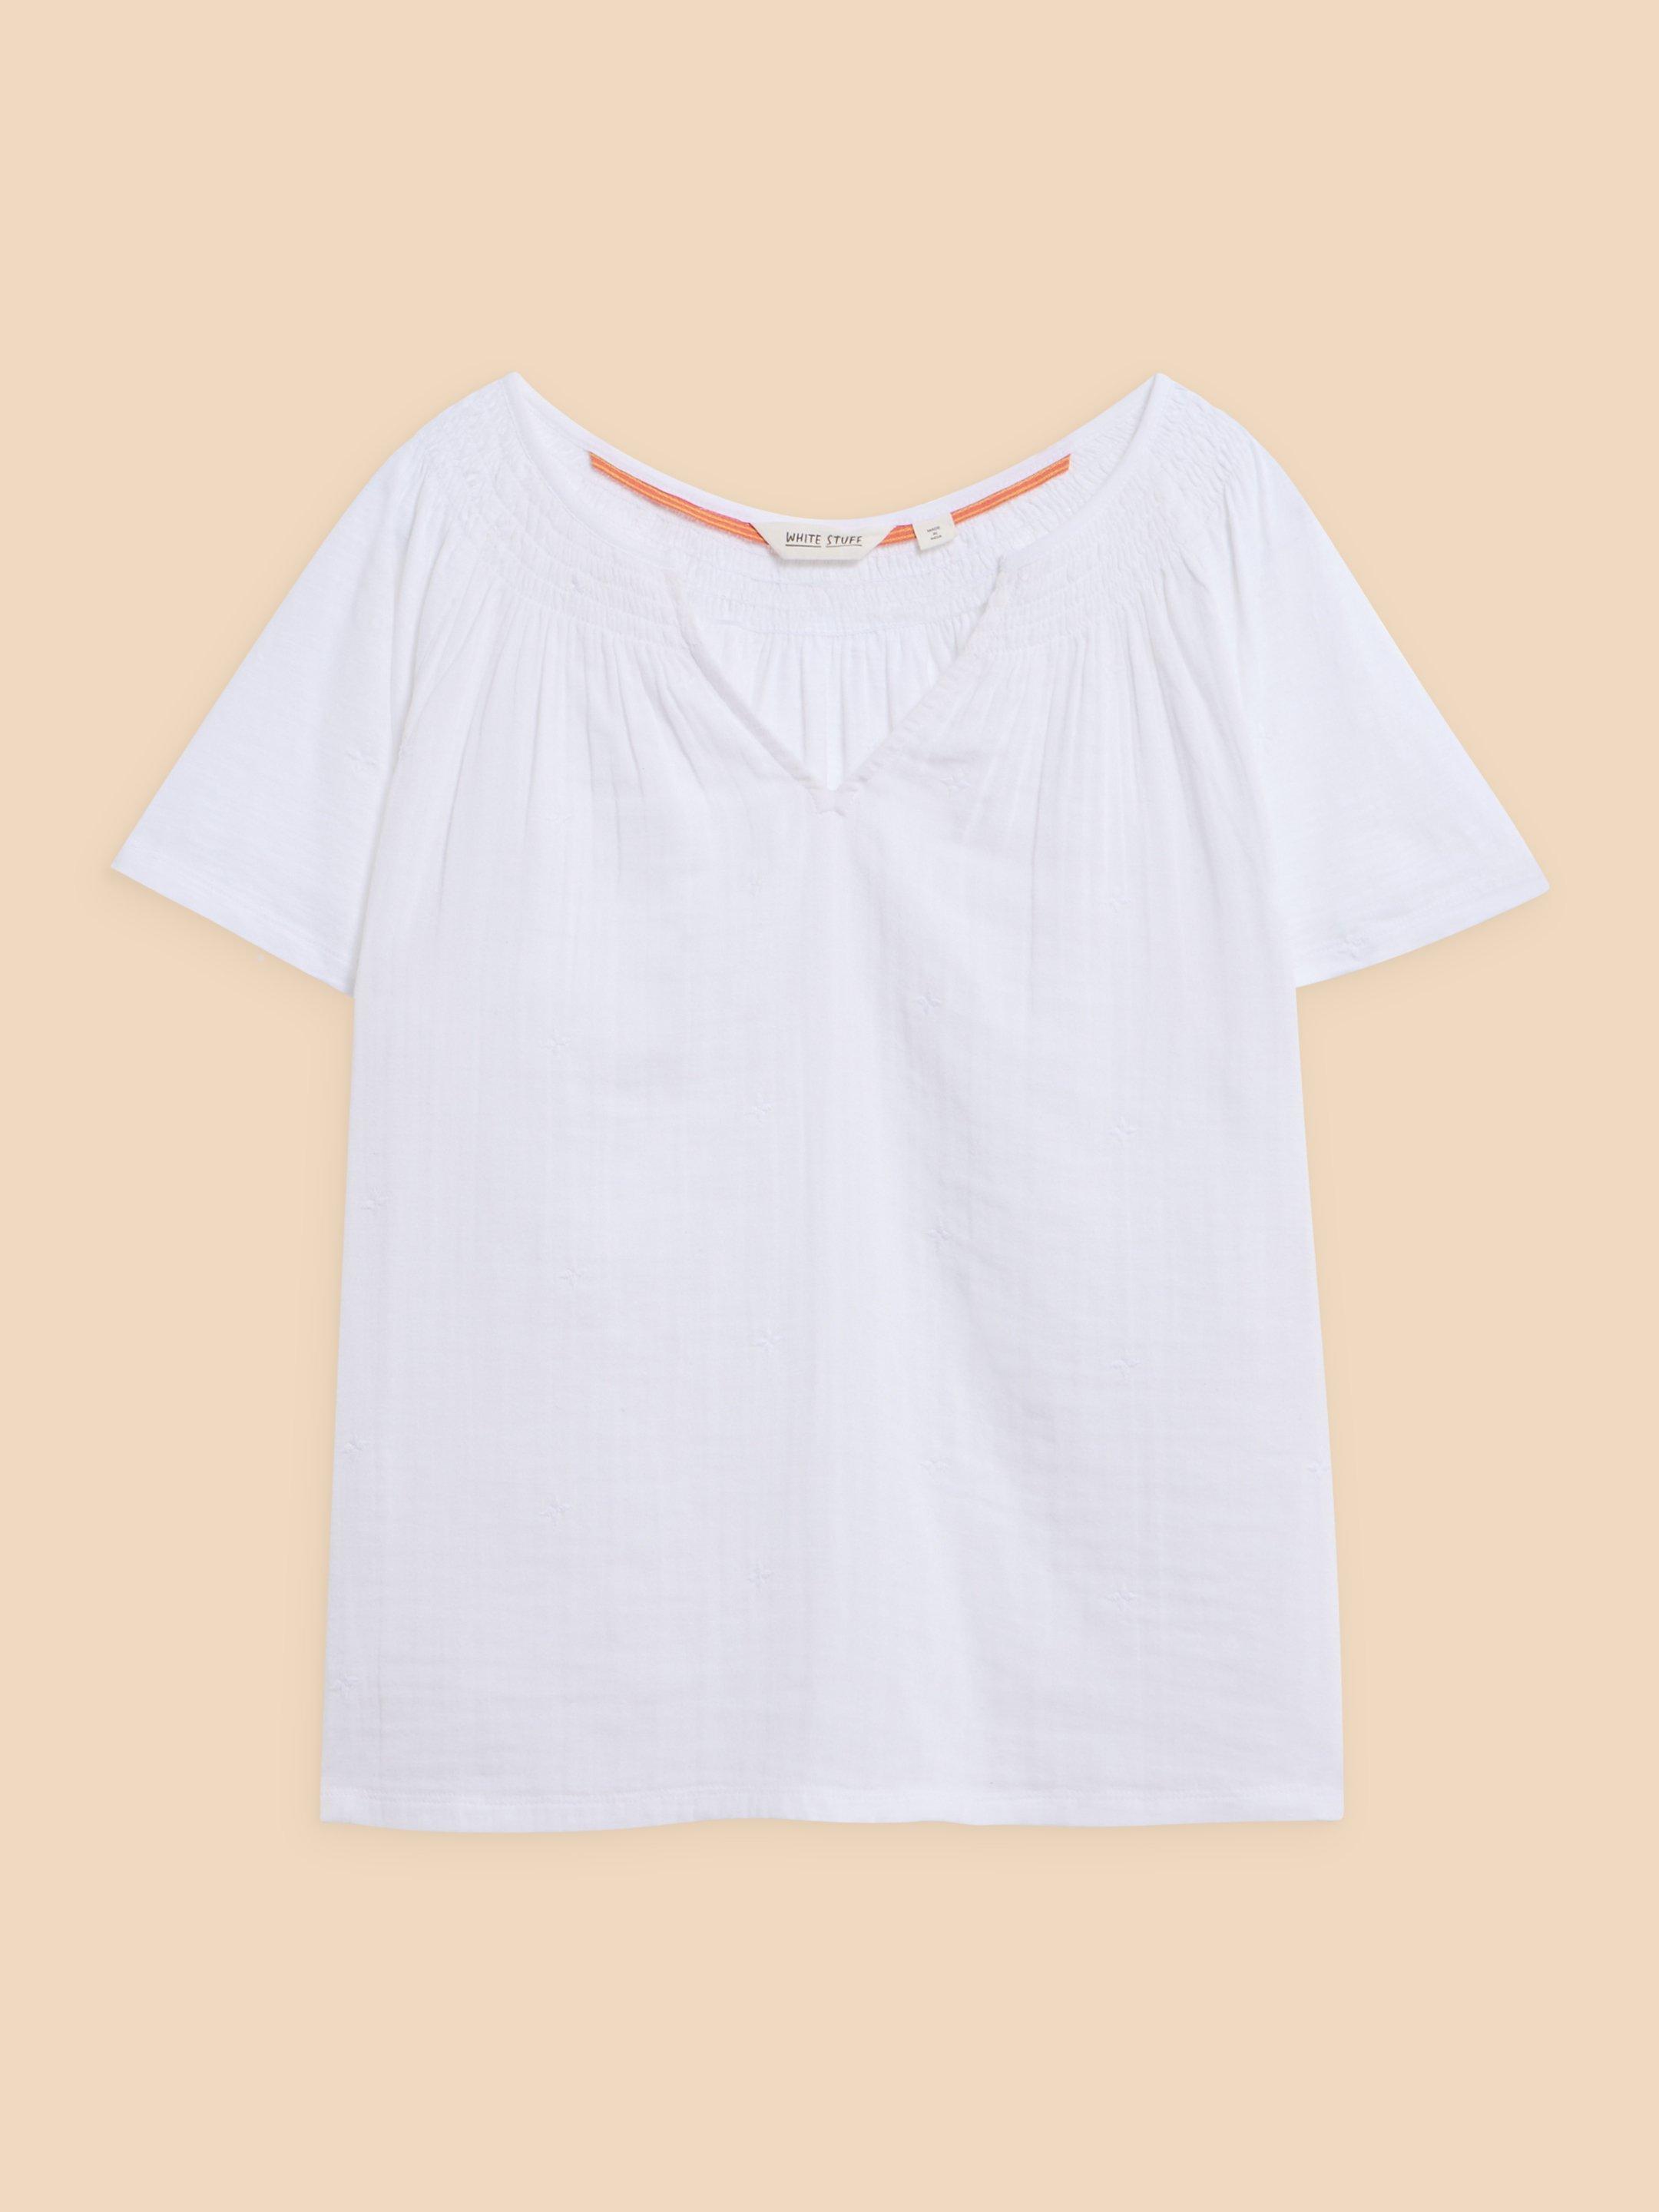 LUELLA NOTCH NECK EMB TOP in BRIL WHITE - FLAT FRONT